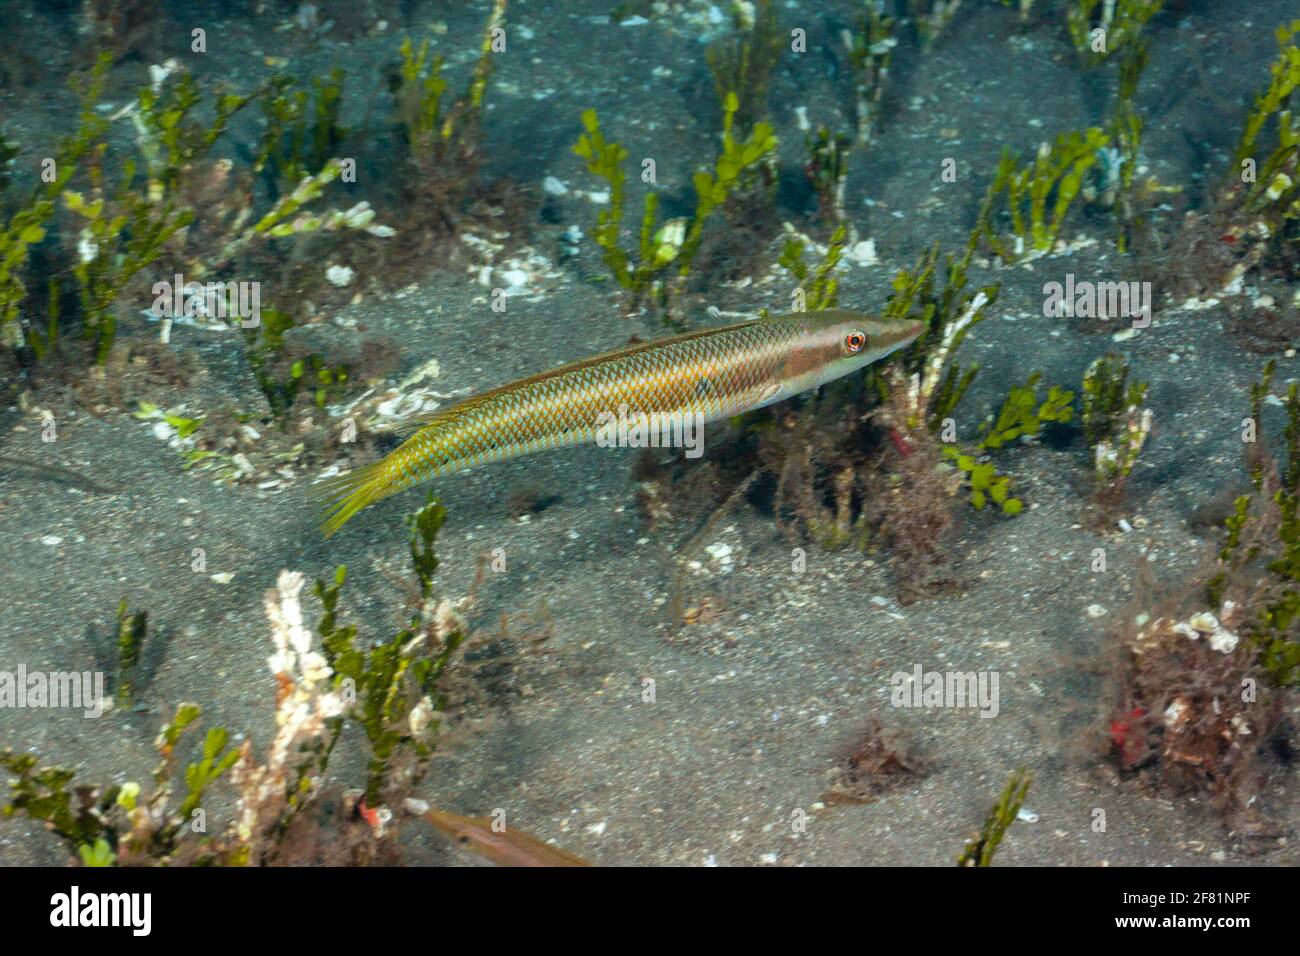 In the wrasse family, the cigar wrasse, Cheilio inermis, is unique and the only species in this genus. This individual is a male, Hawaii. Stock Photo